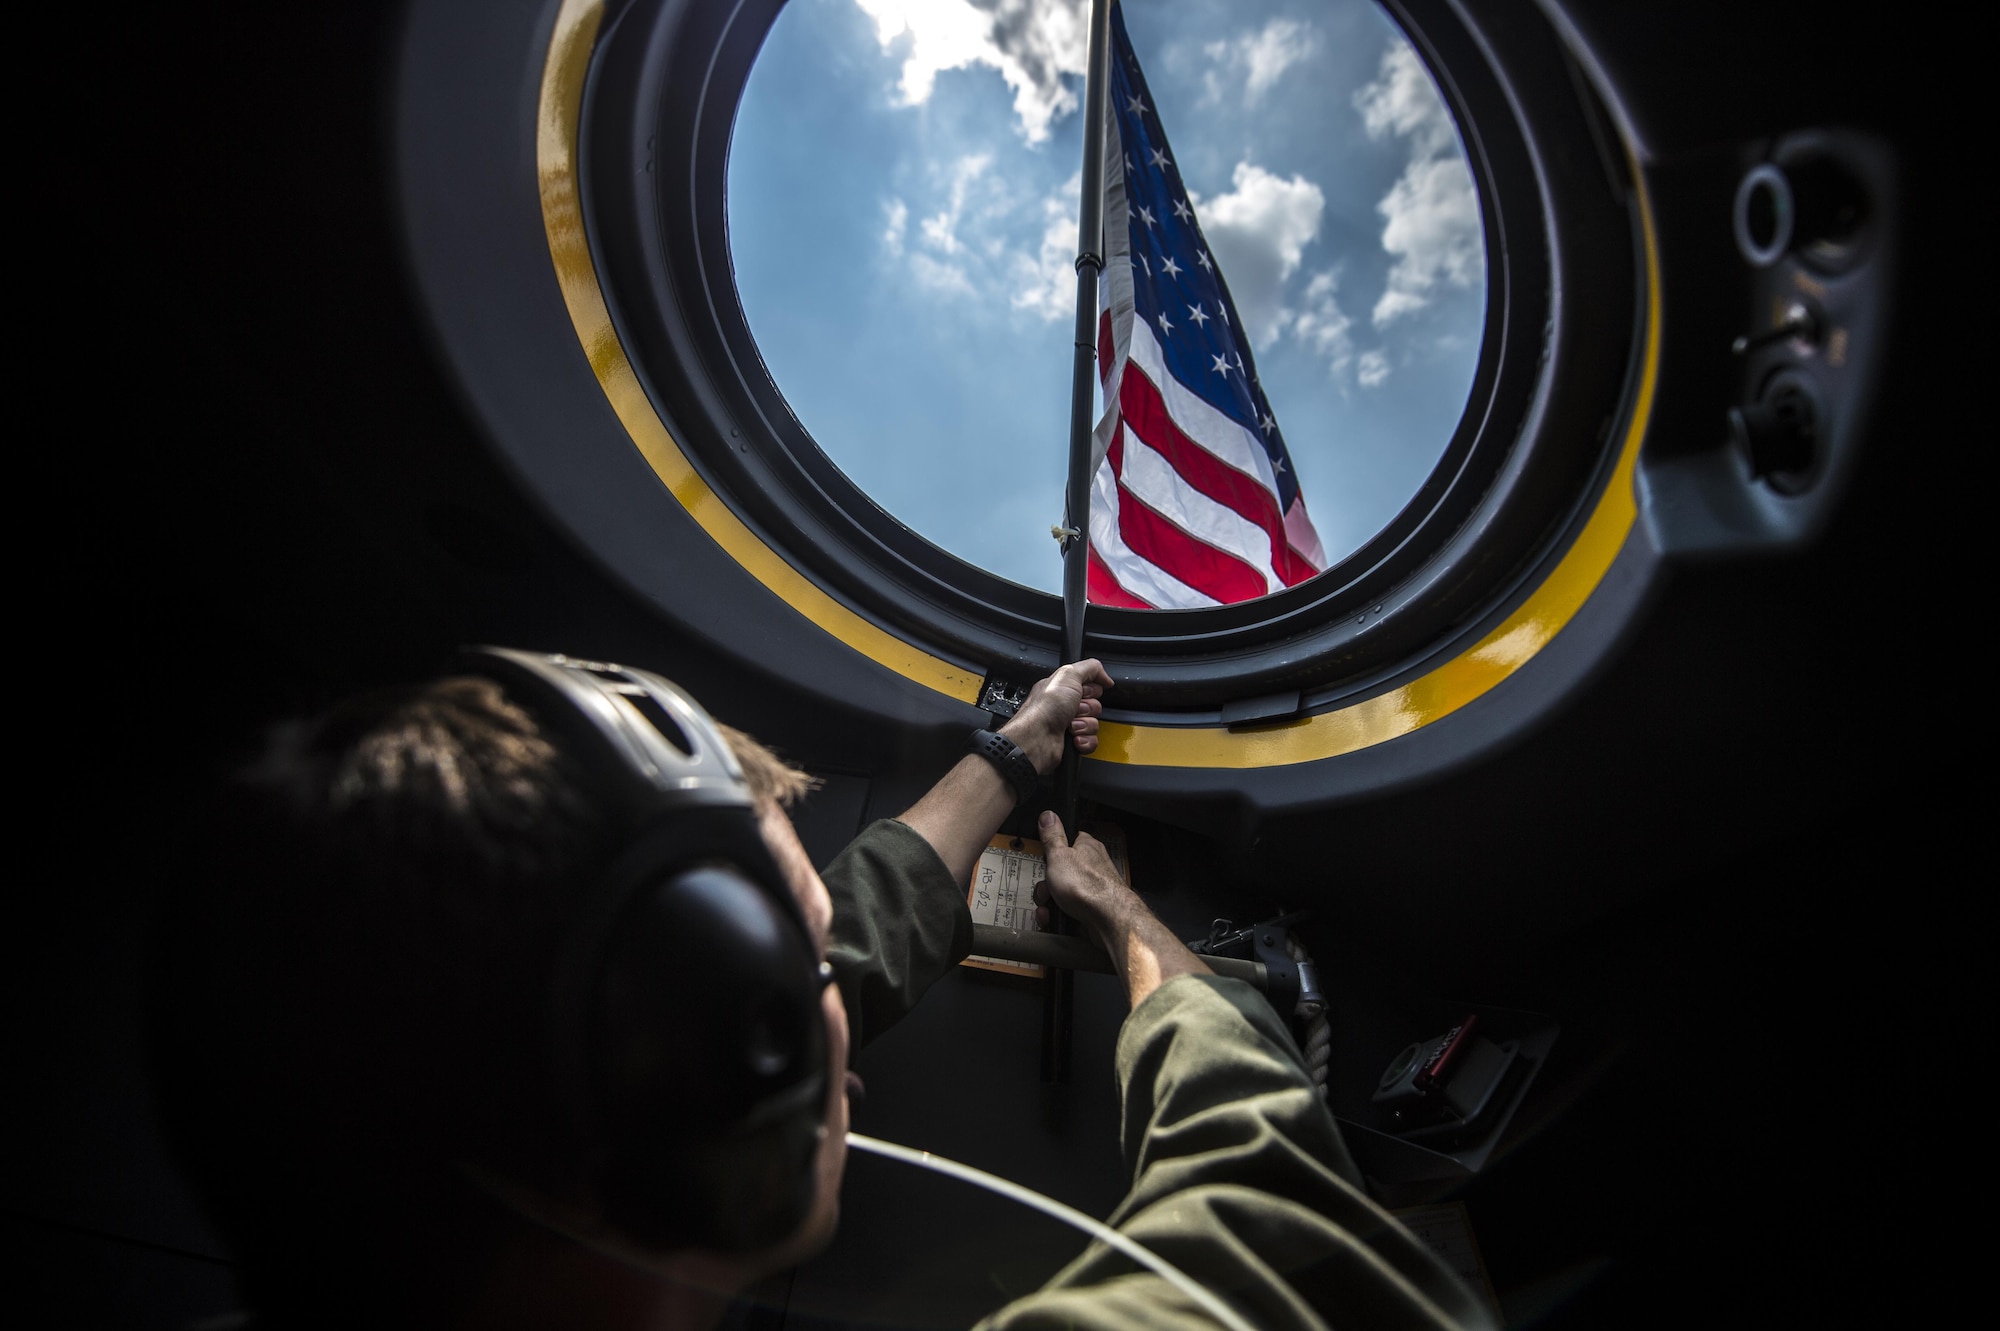 Capt. Brian Schmidt, 1st Special Operations Group Detachment 2 pilot, raises a flag out of the first AC-130J Ghostrider on Hurlburt Field, Fla., July 29, 2015. The 1st Special Operations Wing received Air Force Special Operations Command’s first AC-130J that will be flown by the 1st SOG Det. 2 and maintained by the 1st Special Operations Aircraft Maintenance Squadron. (U.S. Air Force photo/Senior Airman Christopher Callaway)